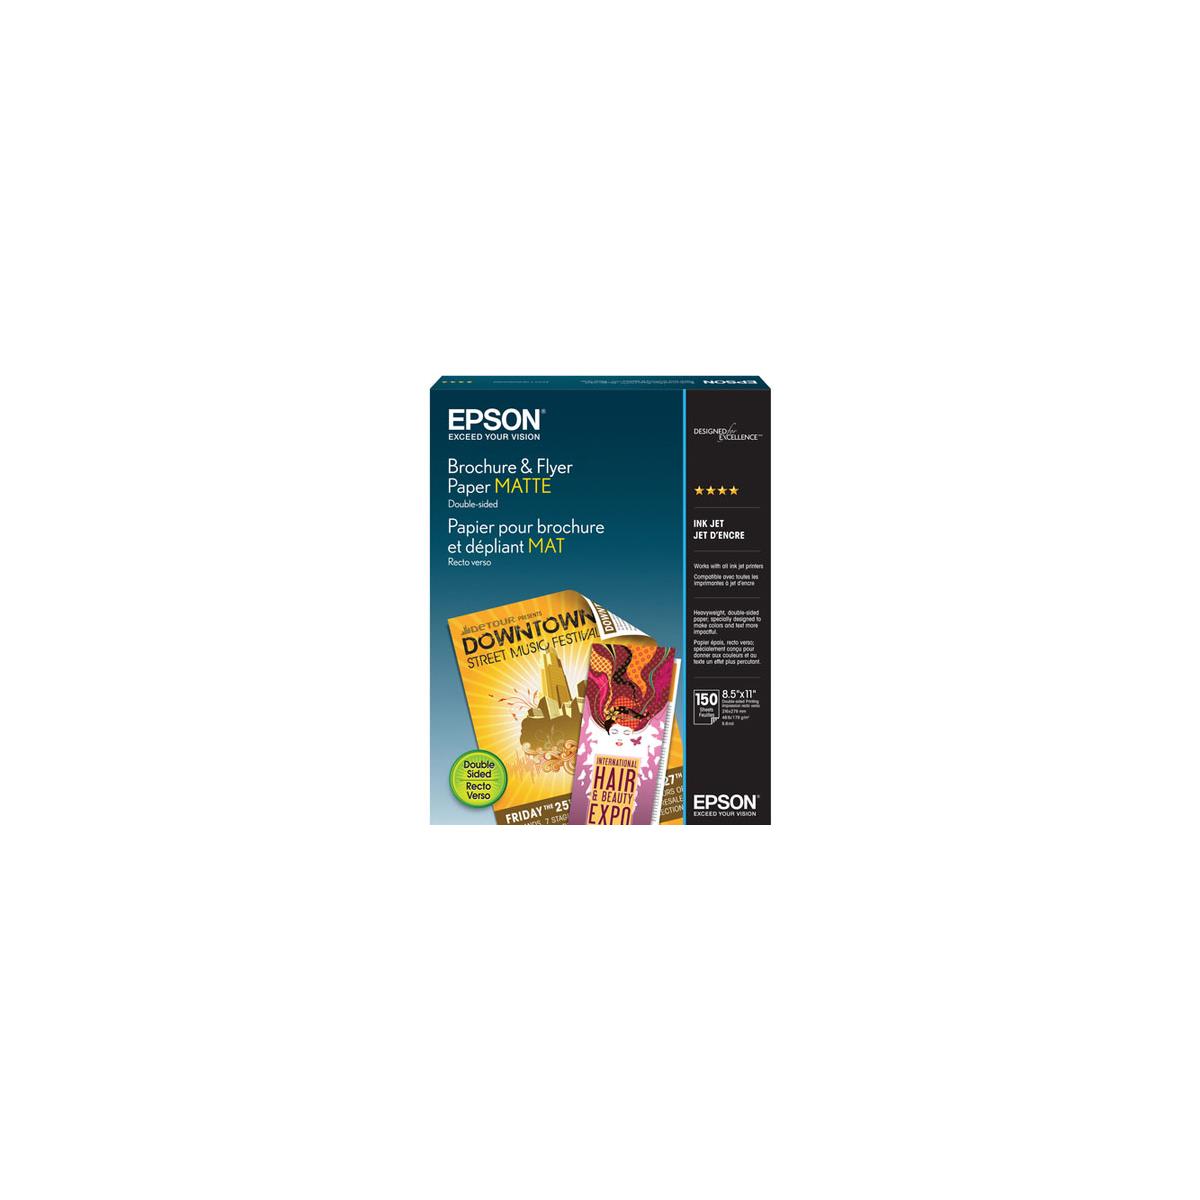 Image of Epson Brochure and Flyer Double Sided Matte Inkjet Paper